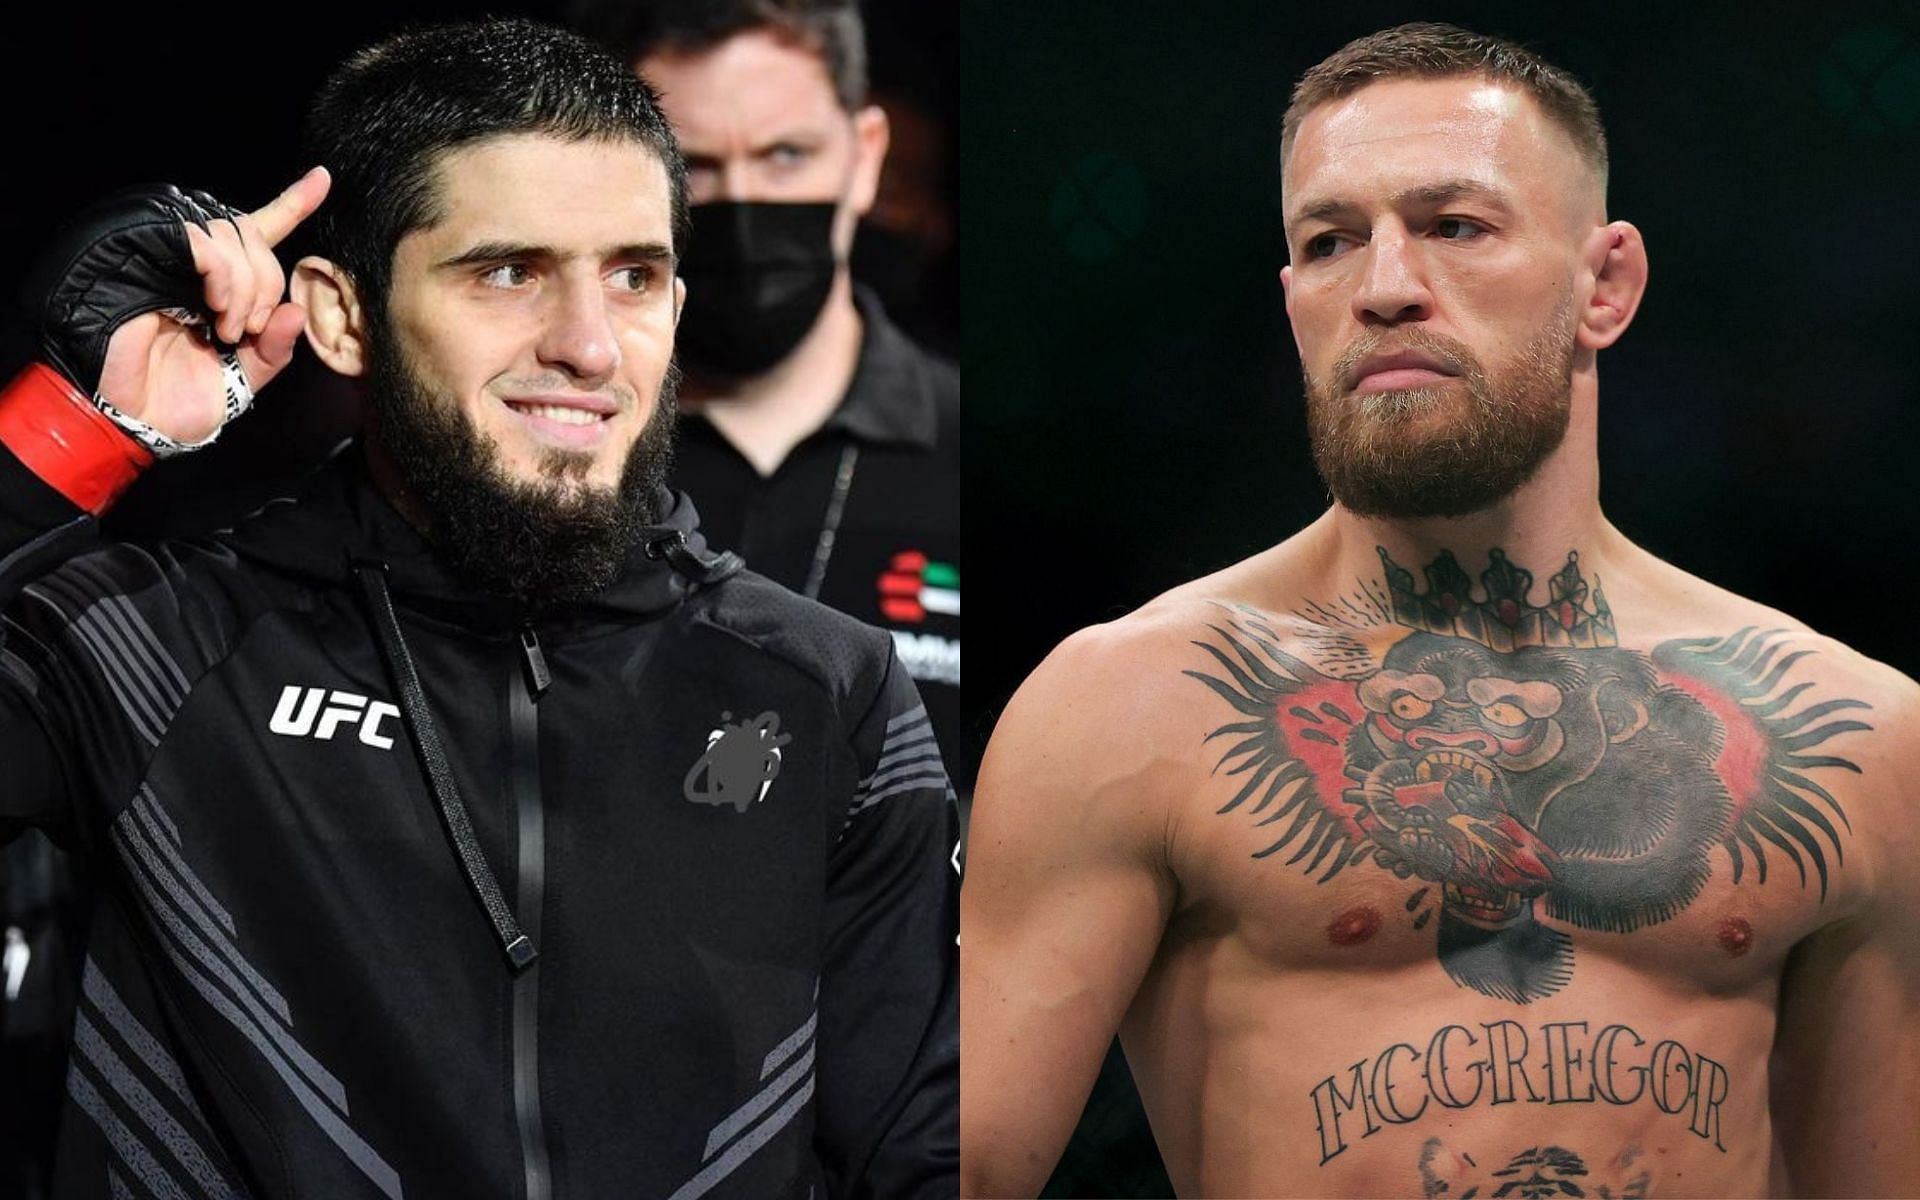 Islam Makhachev (left) and Conor McGregor (right)